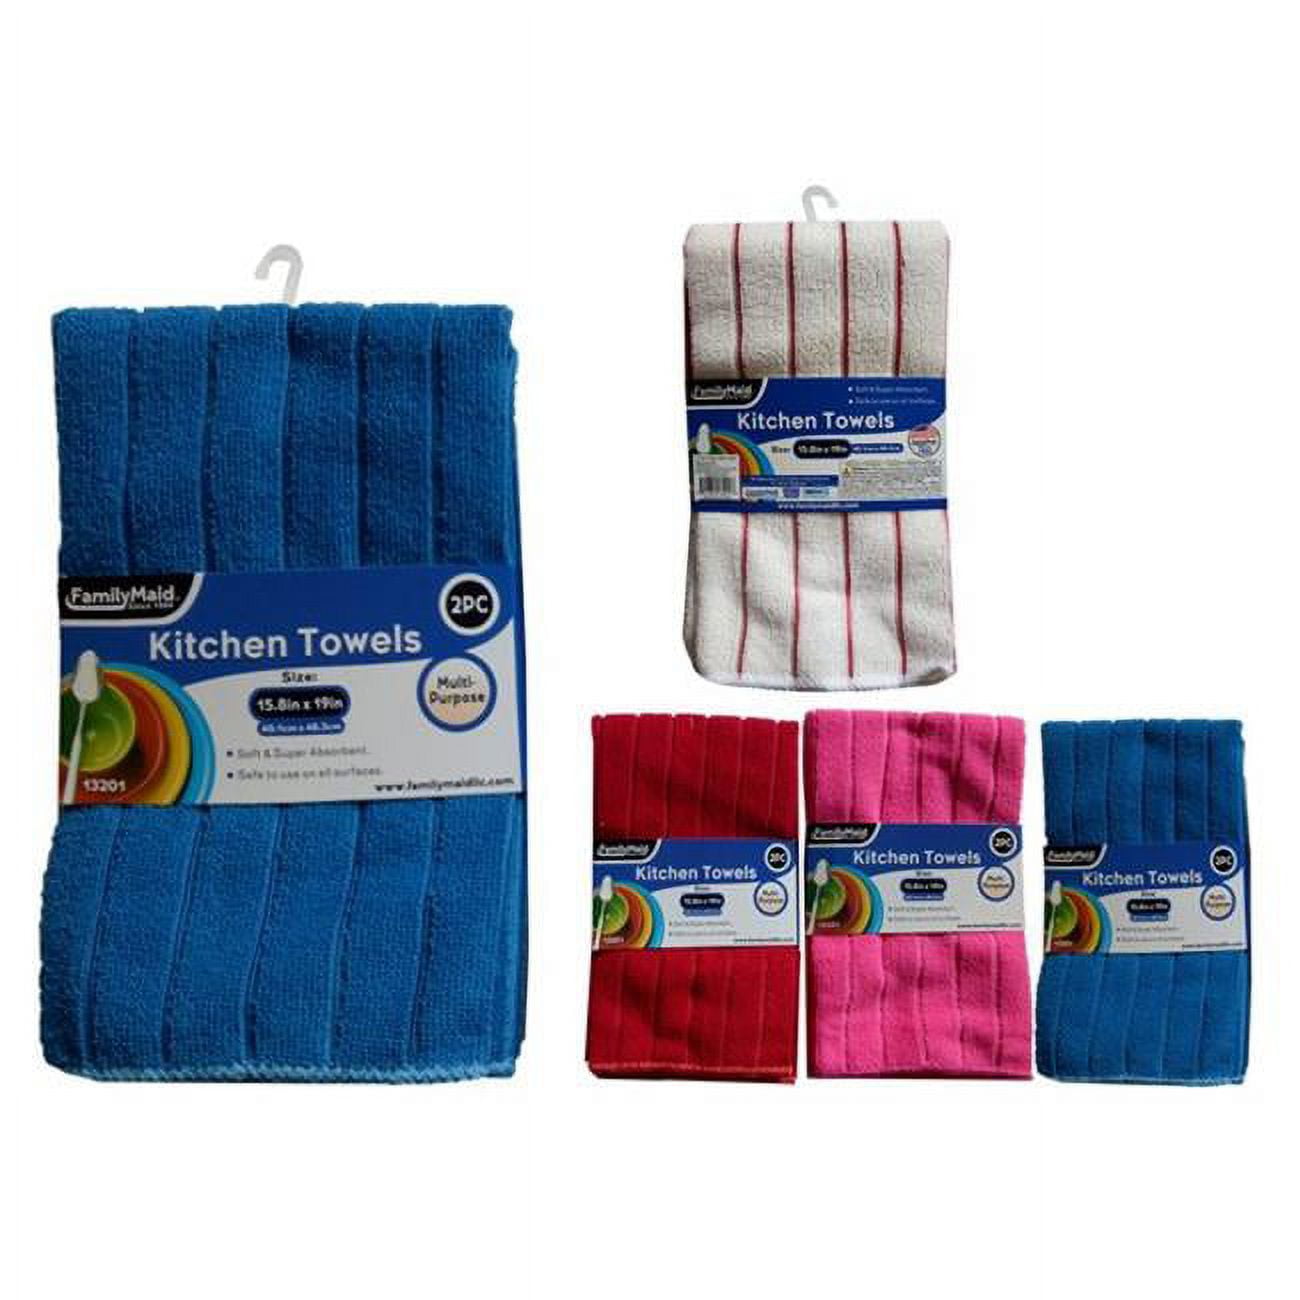 Picture of Familymaid 13201 17 x 18.9 in. Washing Cloth, 3 Assorted Colors - 2 Piece - Pack of 96